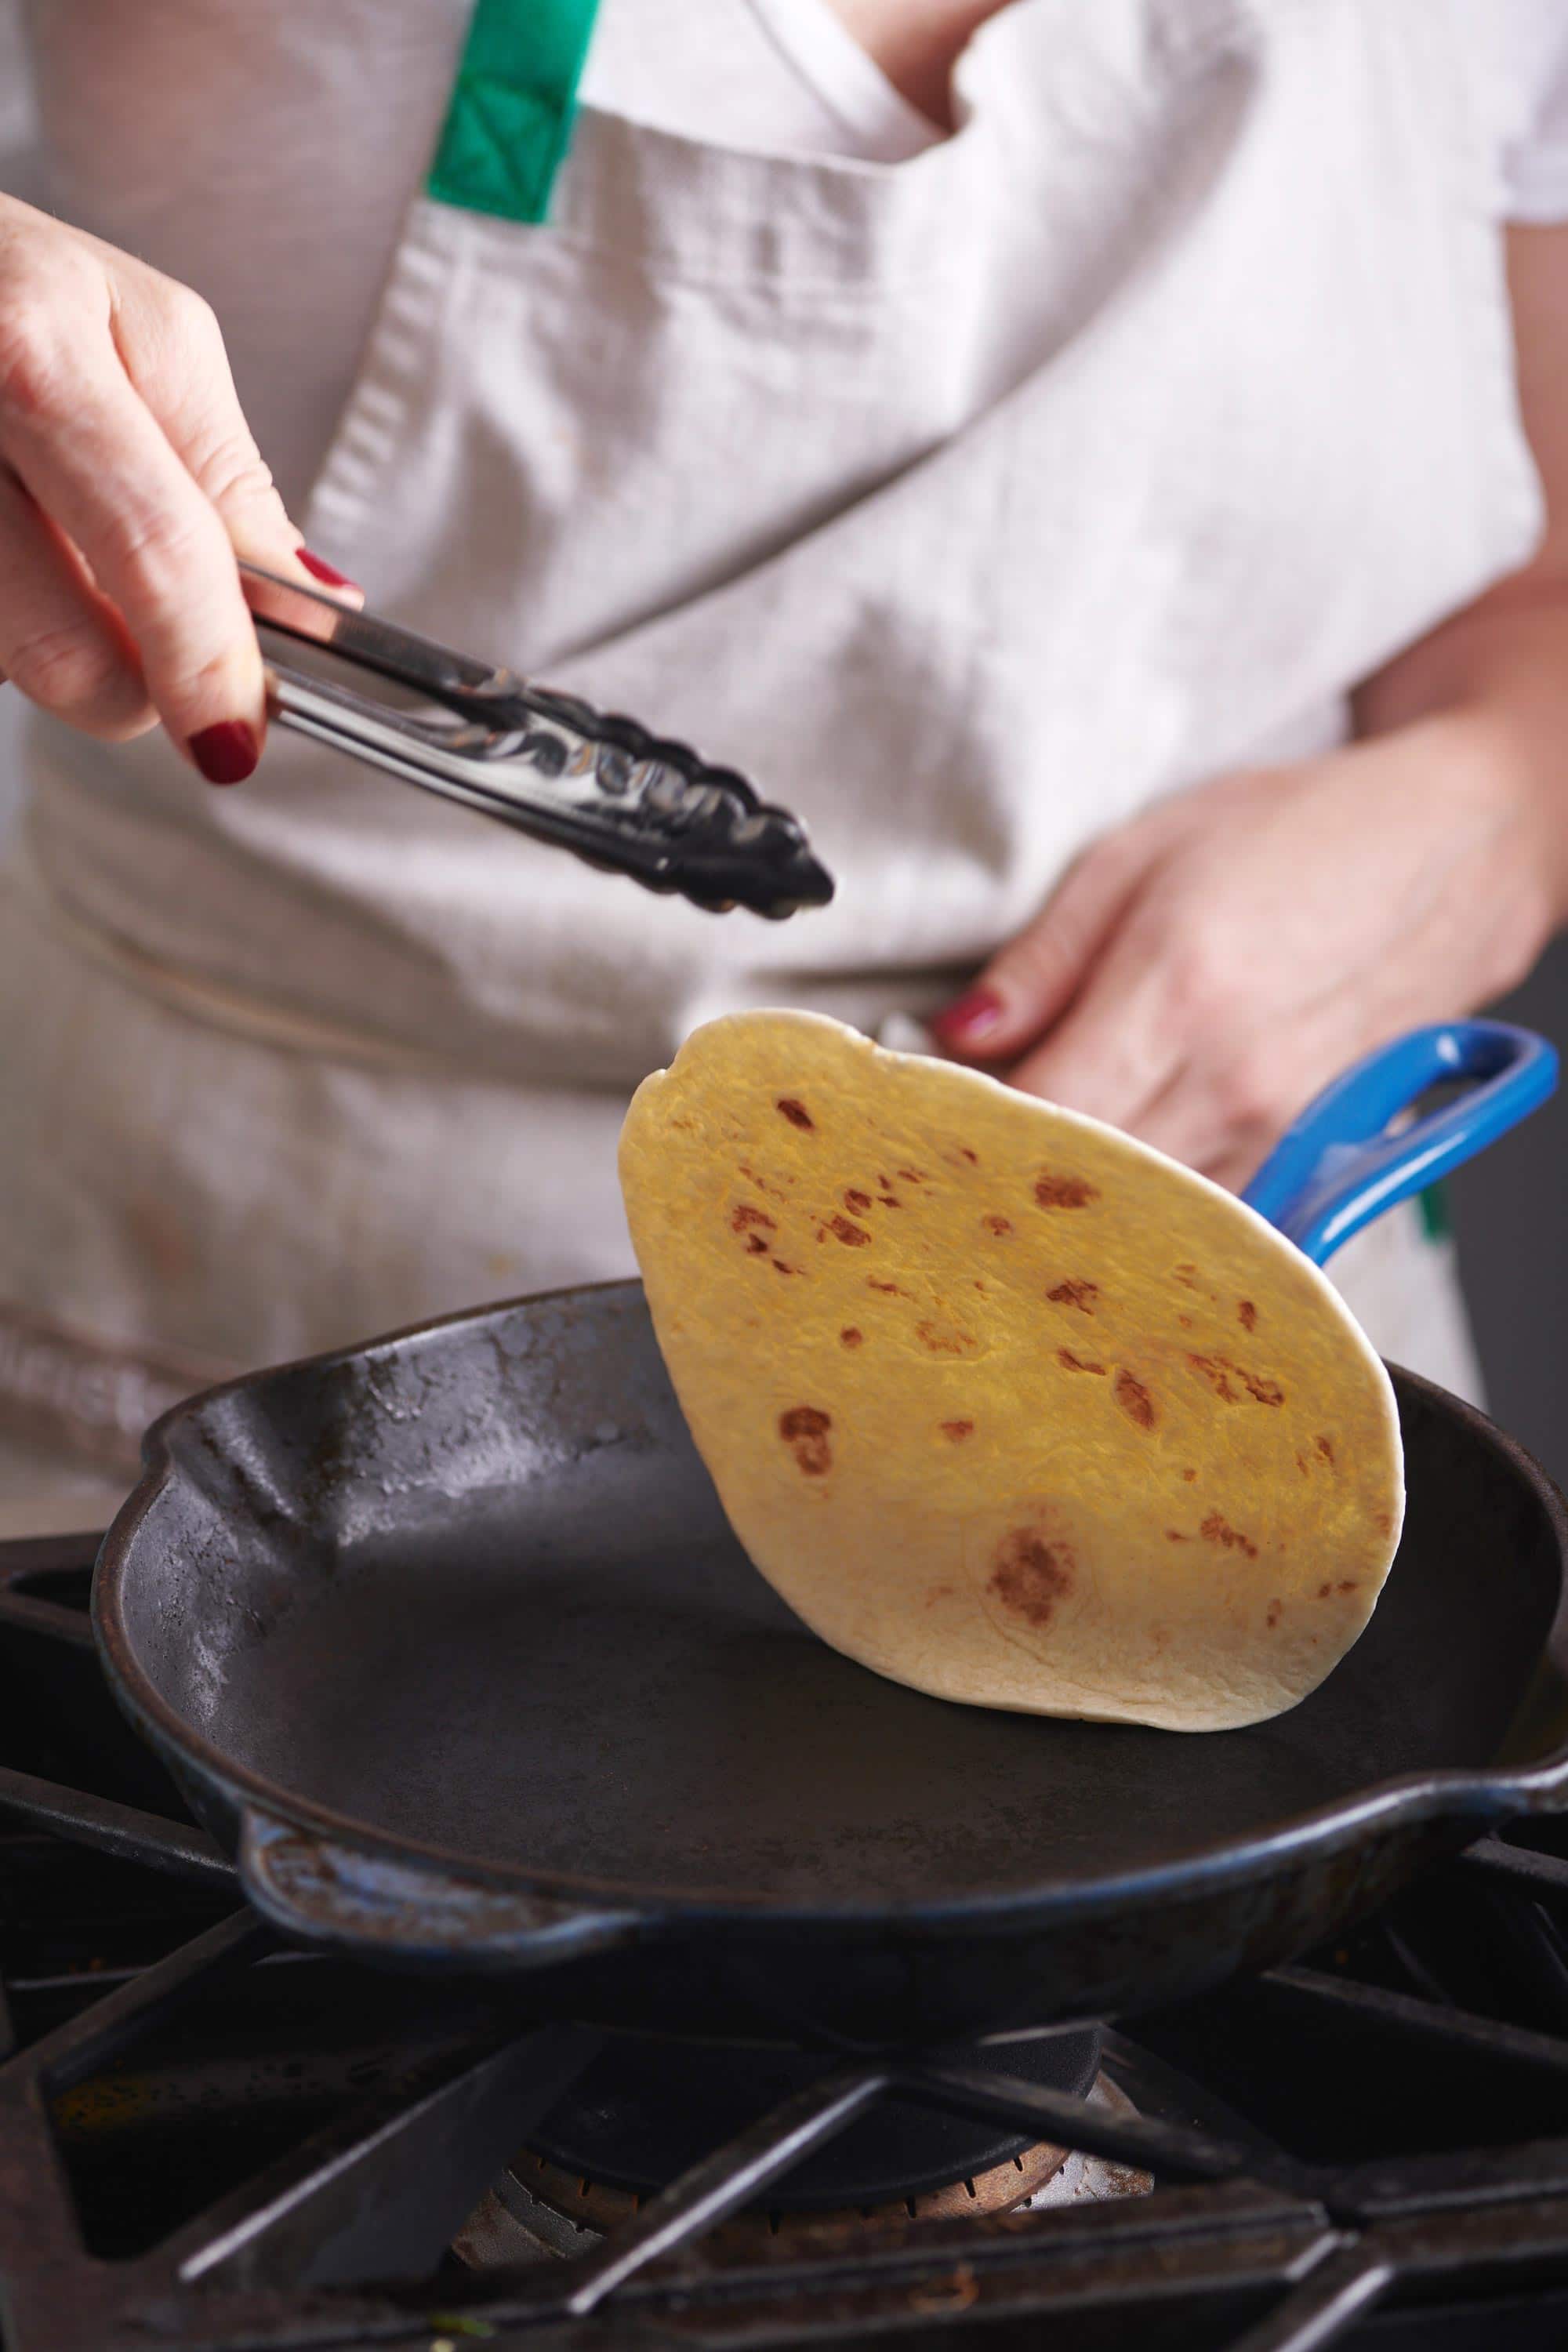 How to Warm Tortillas on the Stove, Burner, or Grill — The Mom 100